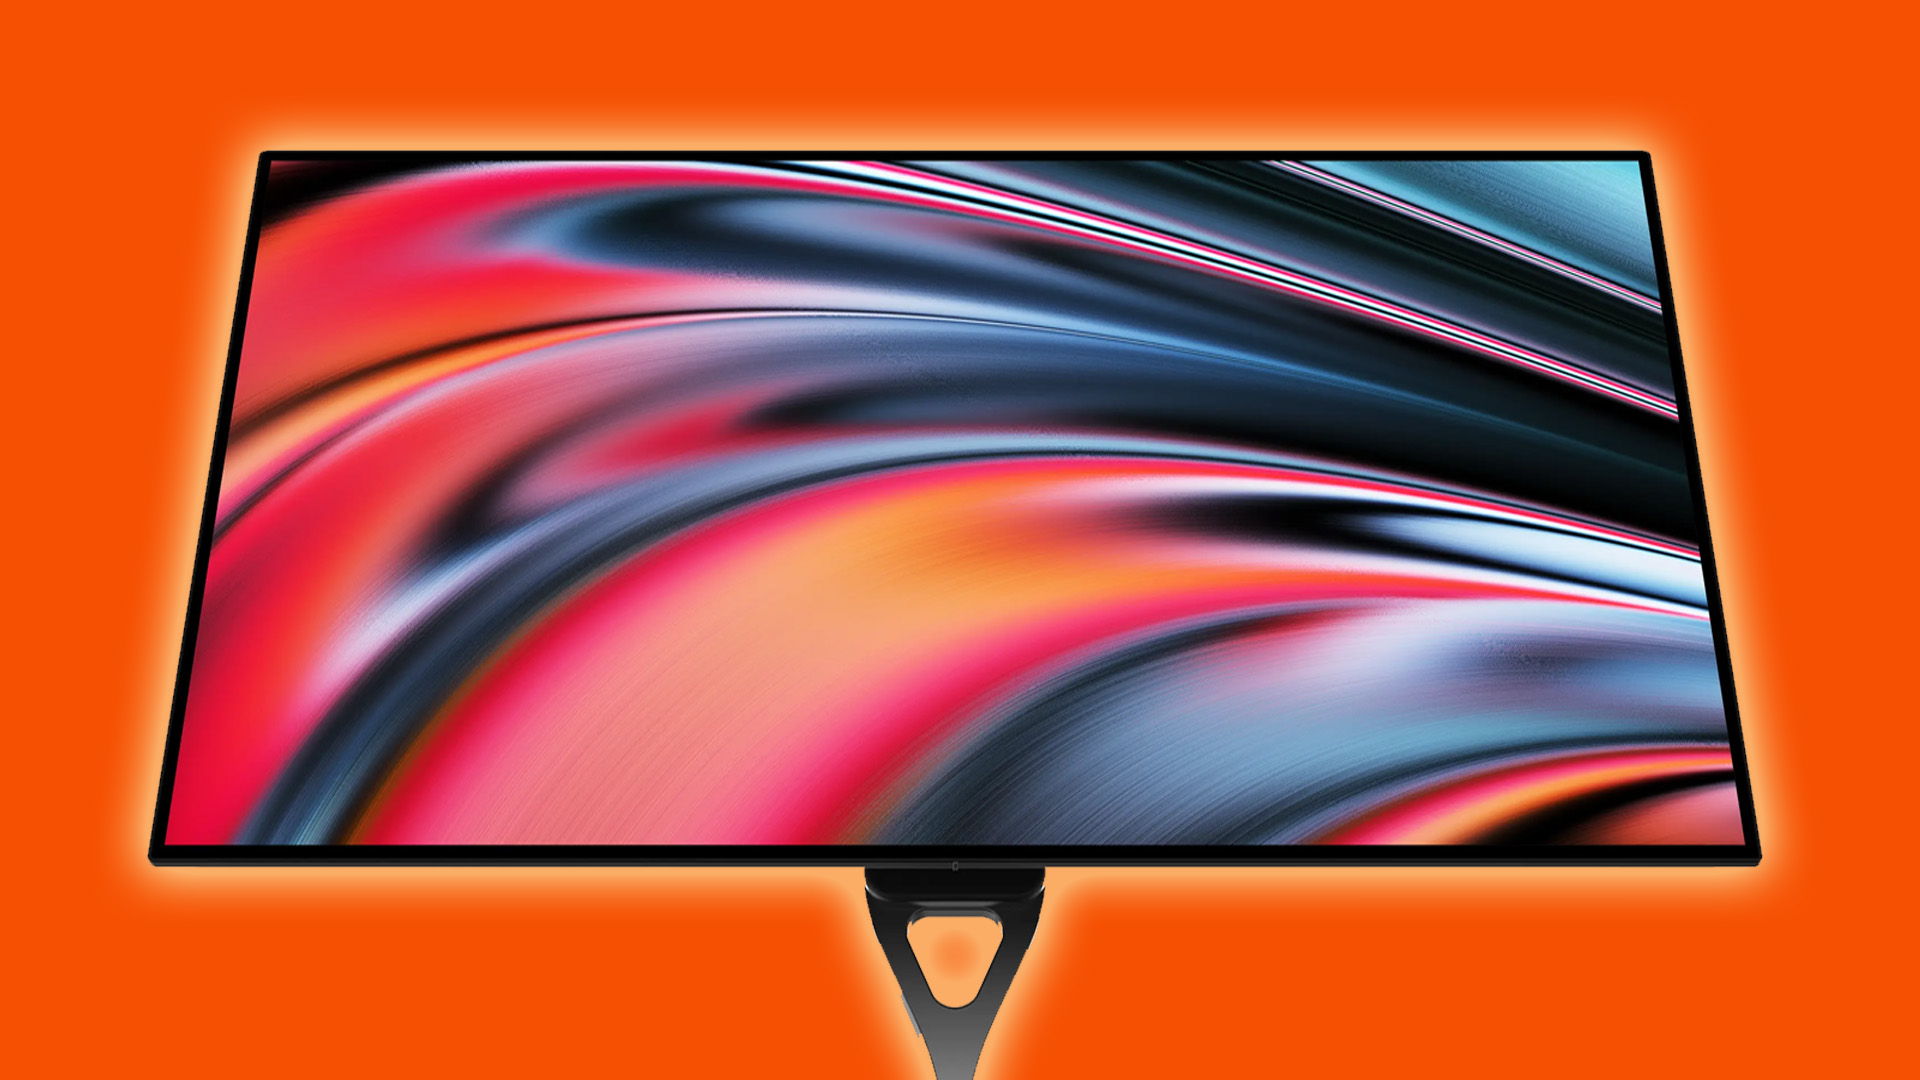 Finally, the world's first 32-inch 4K OLED gaming monitor is coming